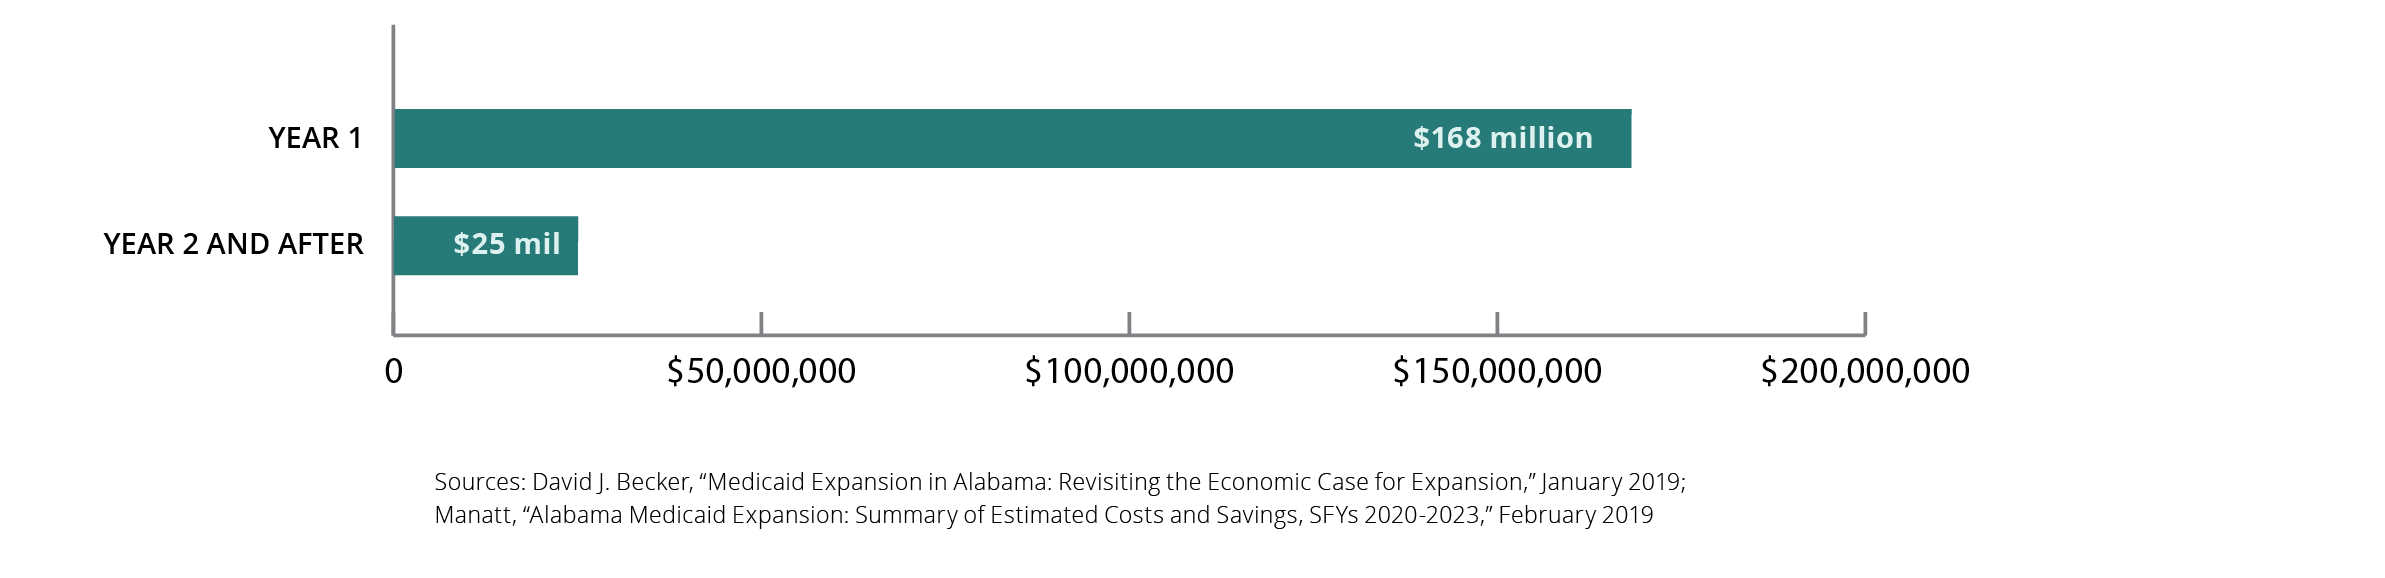 A bar graph showing that the net state cost of Medicaid expansion would be $168 million in year 1 and $25 million in year 2 and after. Sources: David J. Becker, "Medicaid Expansion in Alabama: Revisiting the Economic Case for Expansion," January 2019; Manatt, "Alabama Medicaid Expansion: Summary of Estimated Costs and Savings, SFYs 2020-2023," February 2019.